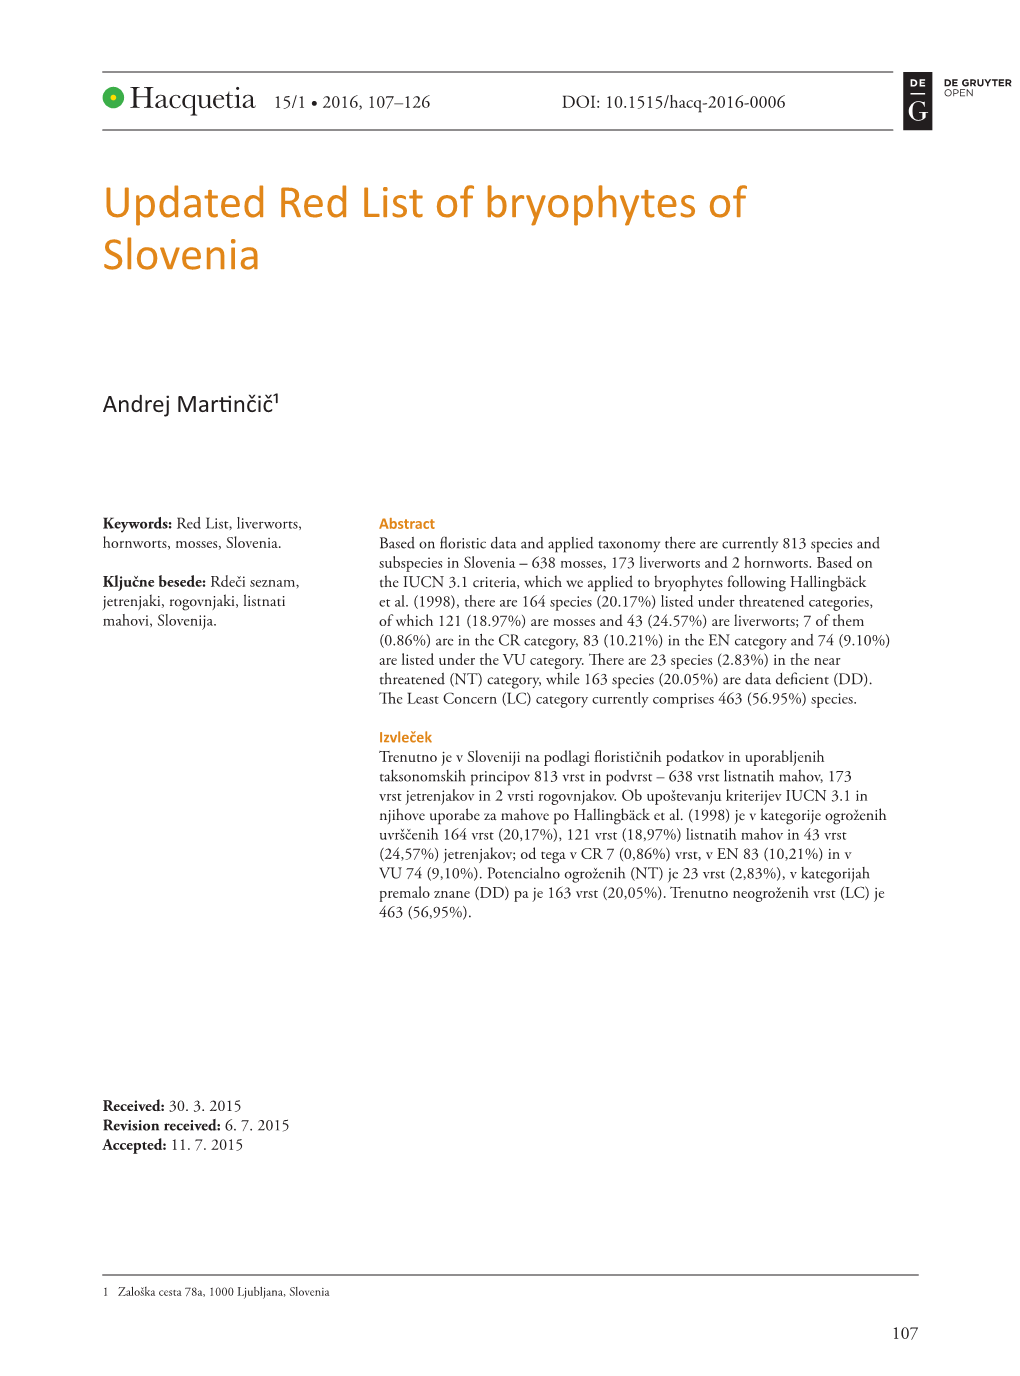 Updated Red List of Bryophytes of Slovenia